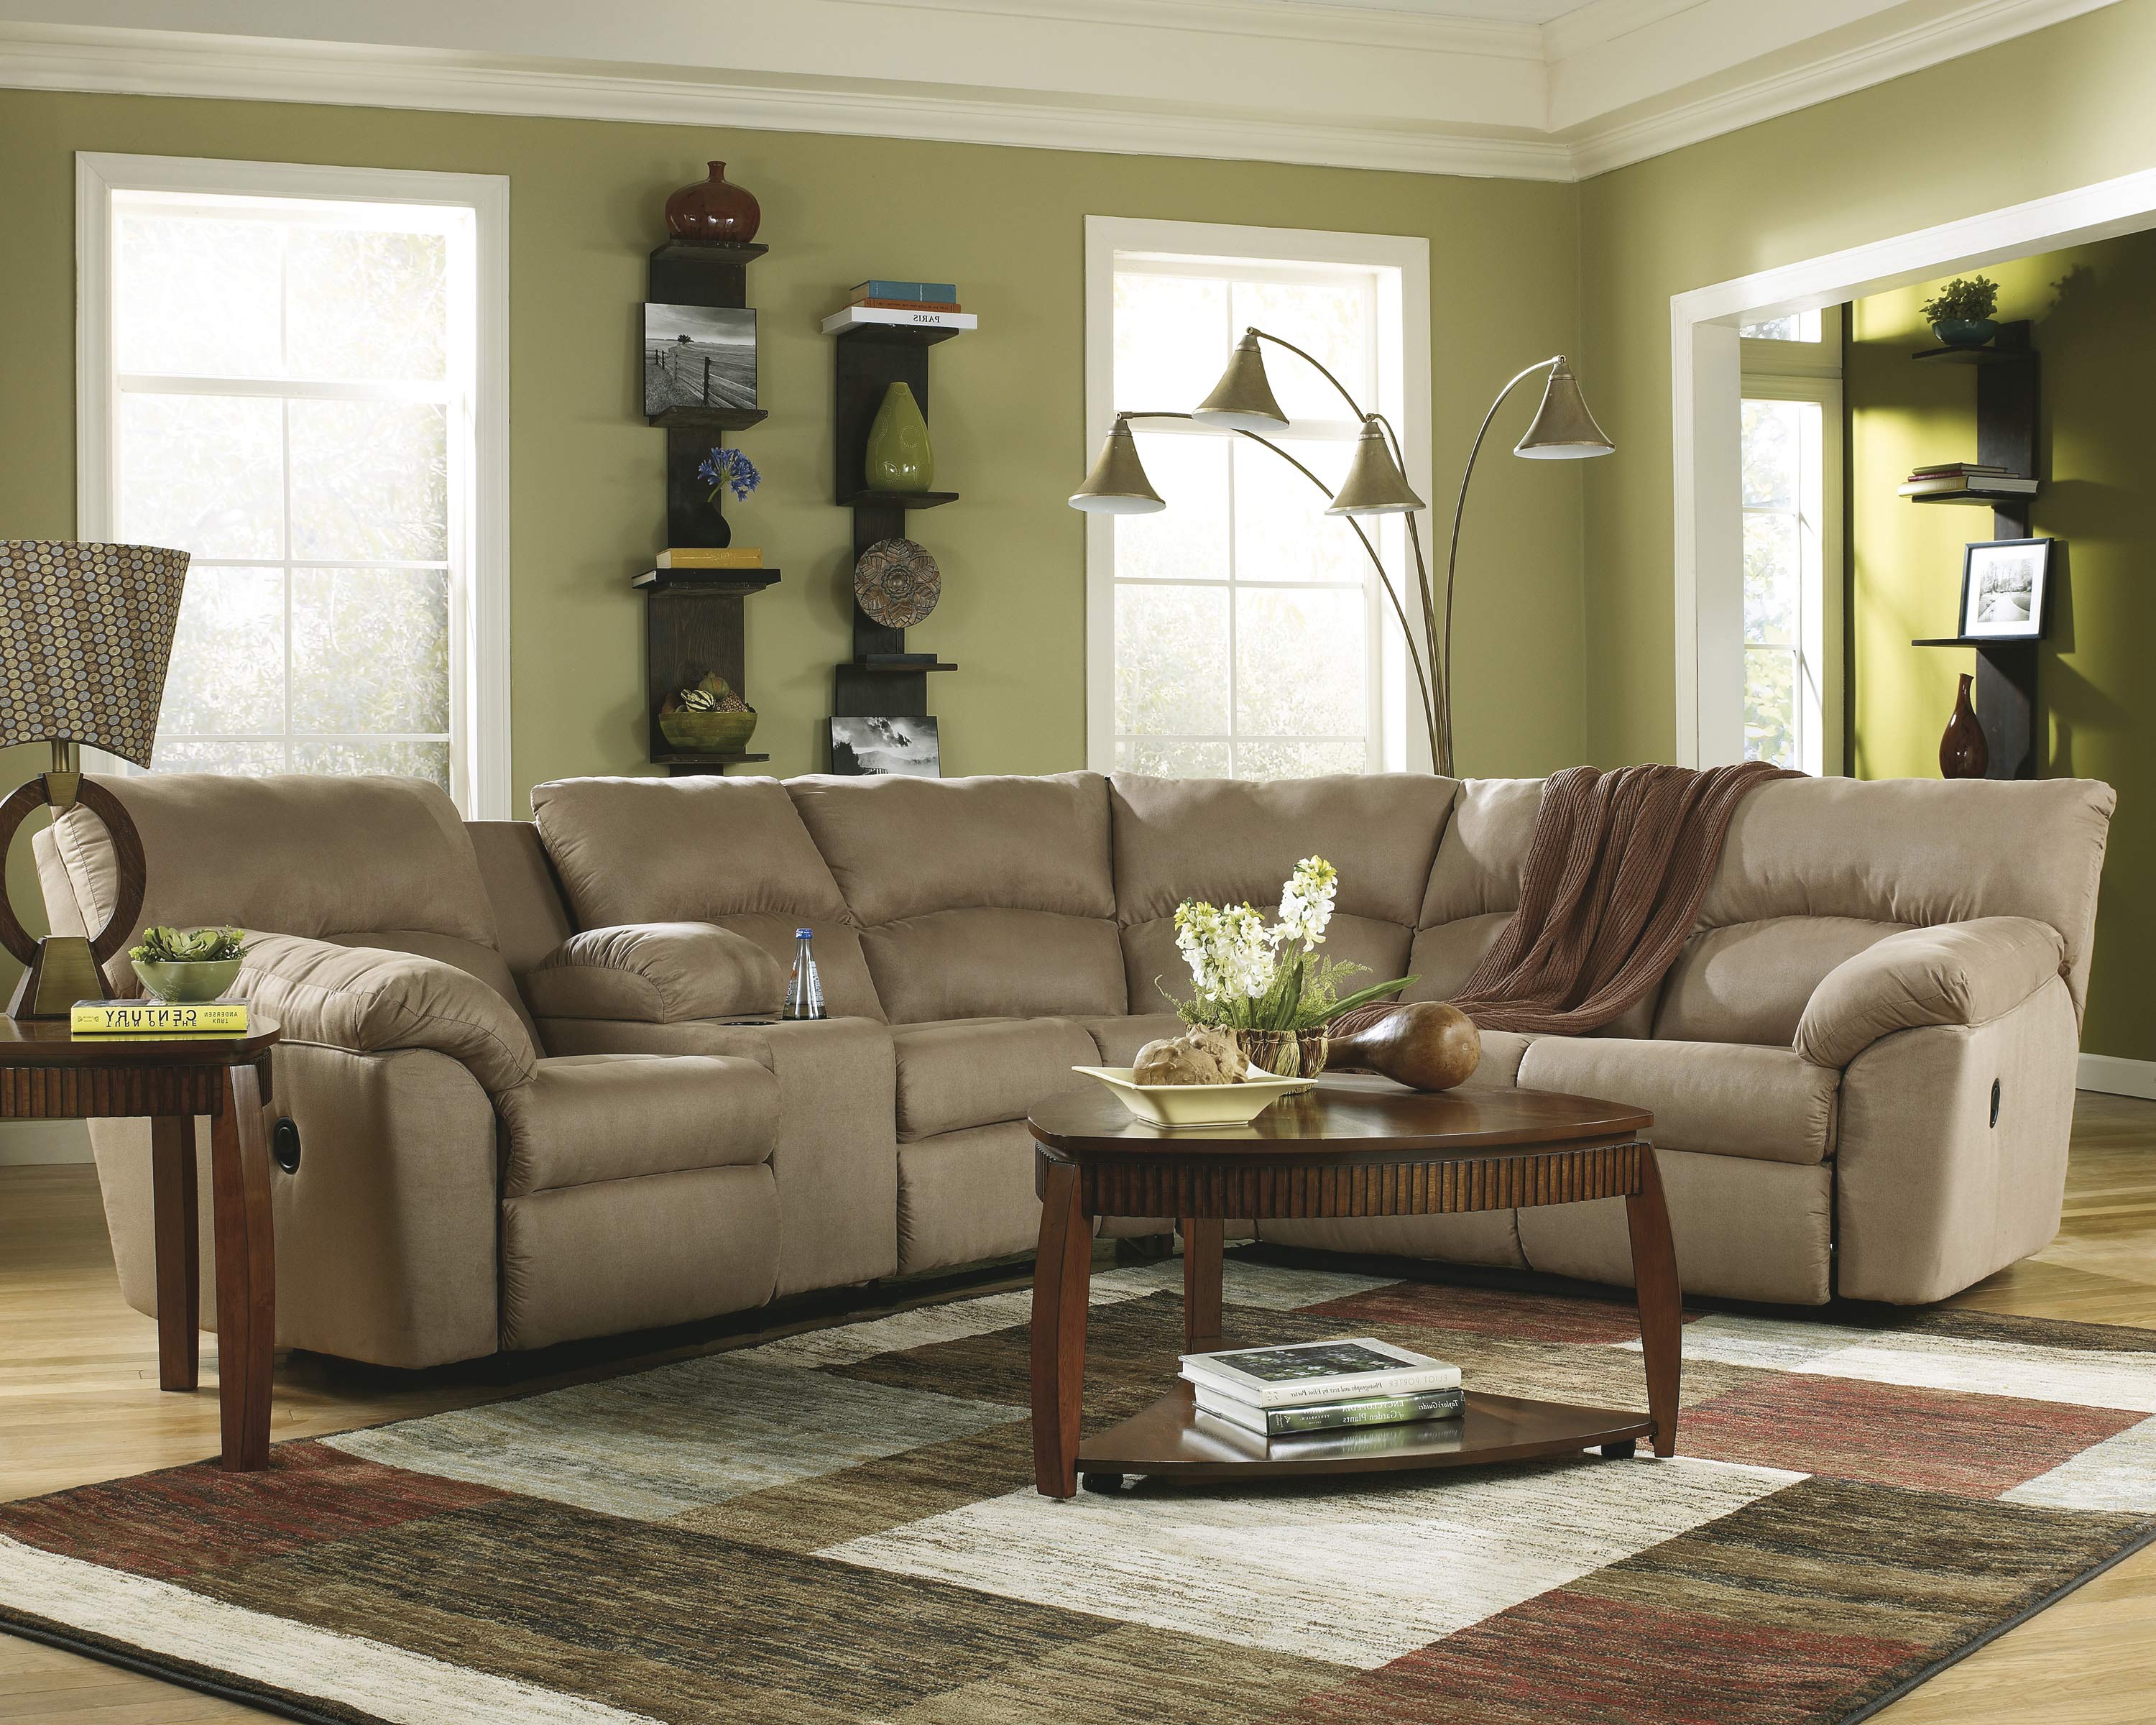  Furniture For Living Room Ideas 